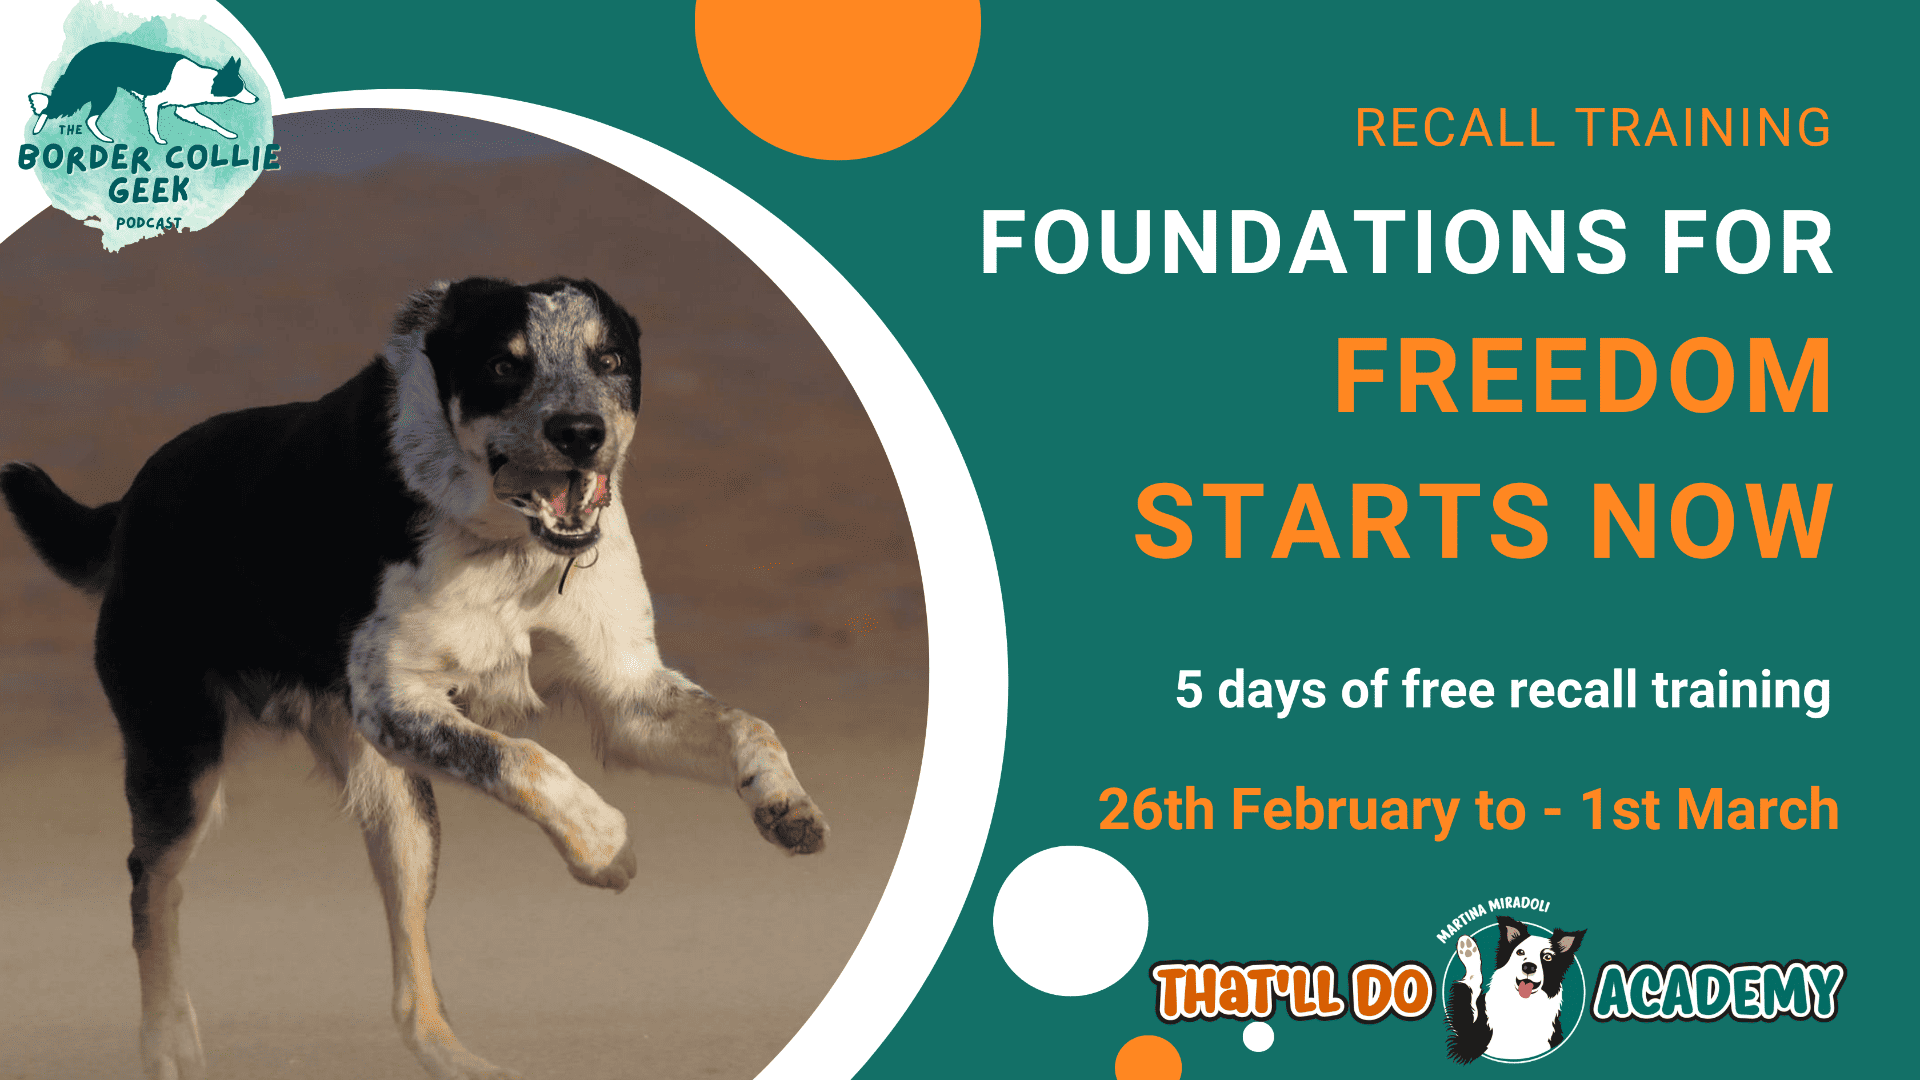 Foundations for Freedom free recall training for border collies